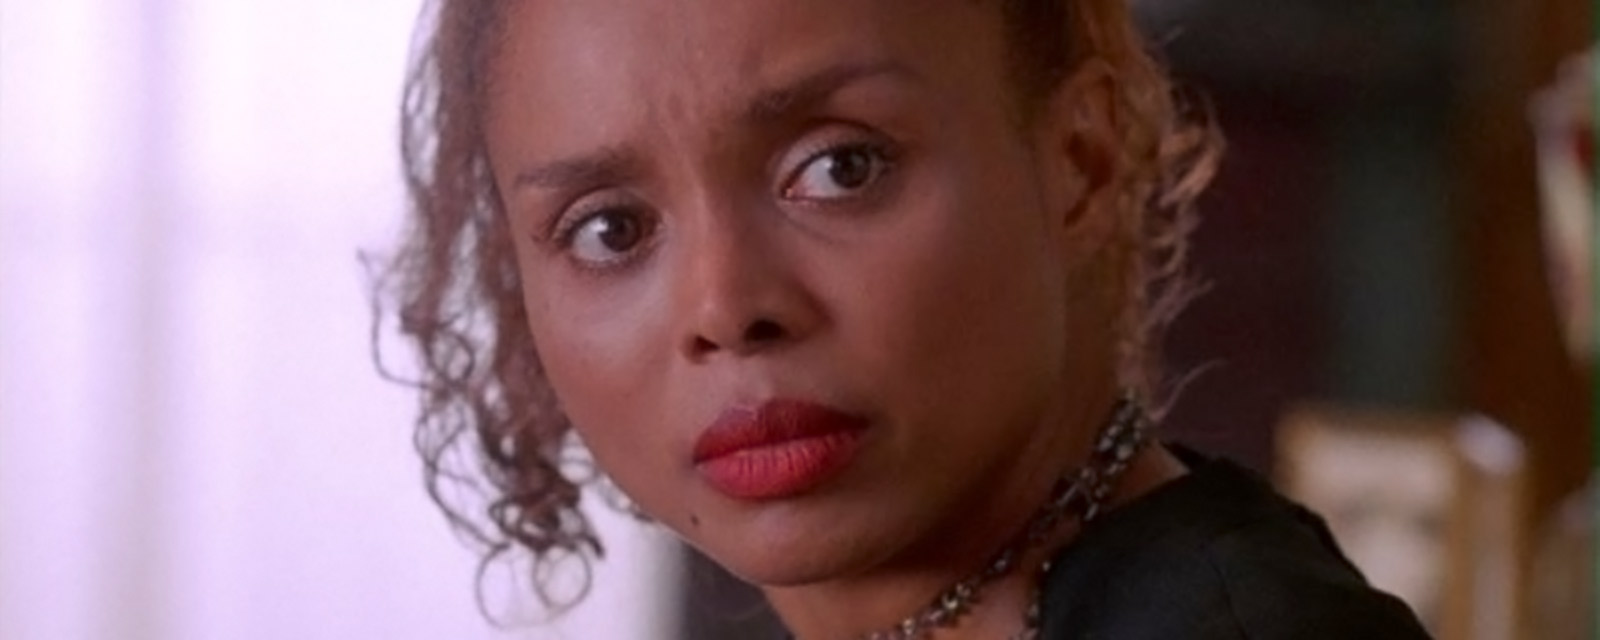 On Debbi Morgan In Eves Bayou 1997 Film Comment 